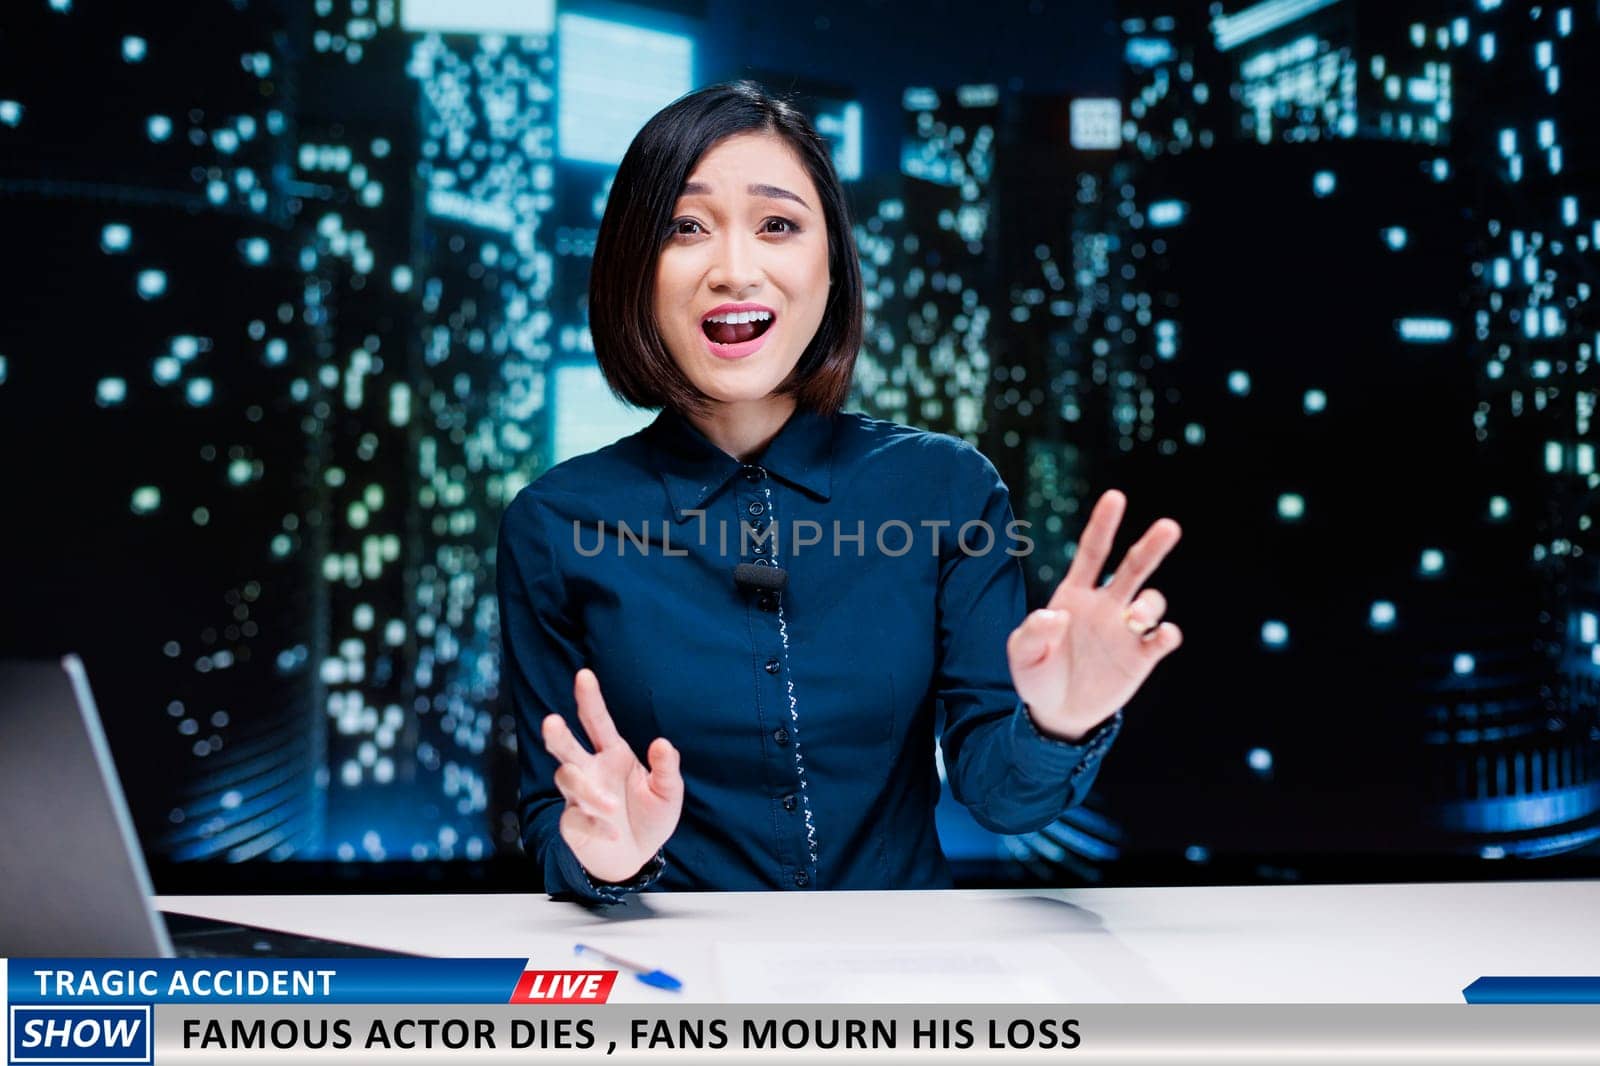 Journalist talks about tragic accident on night show, announcing famous actor dying and leaving nation in mourning. Woman presenter addresses death of appreciated celebrity, devastated fans.